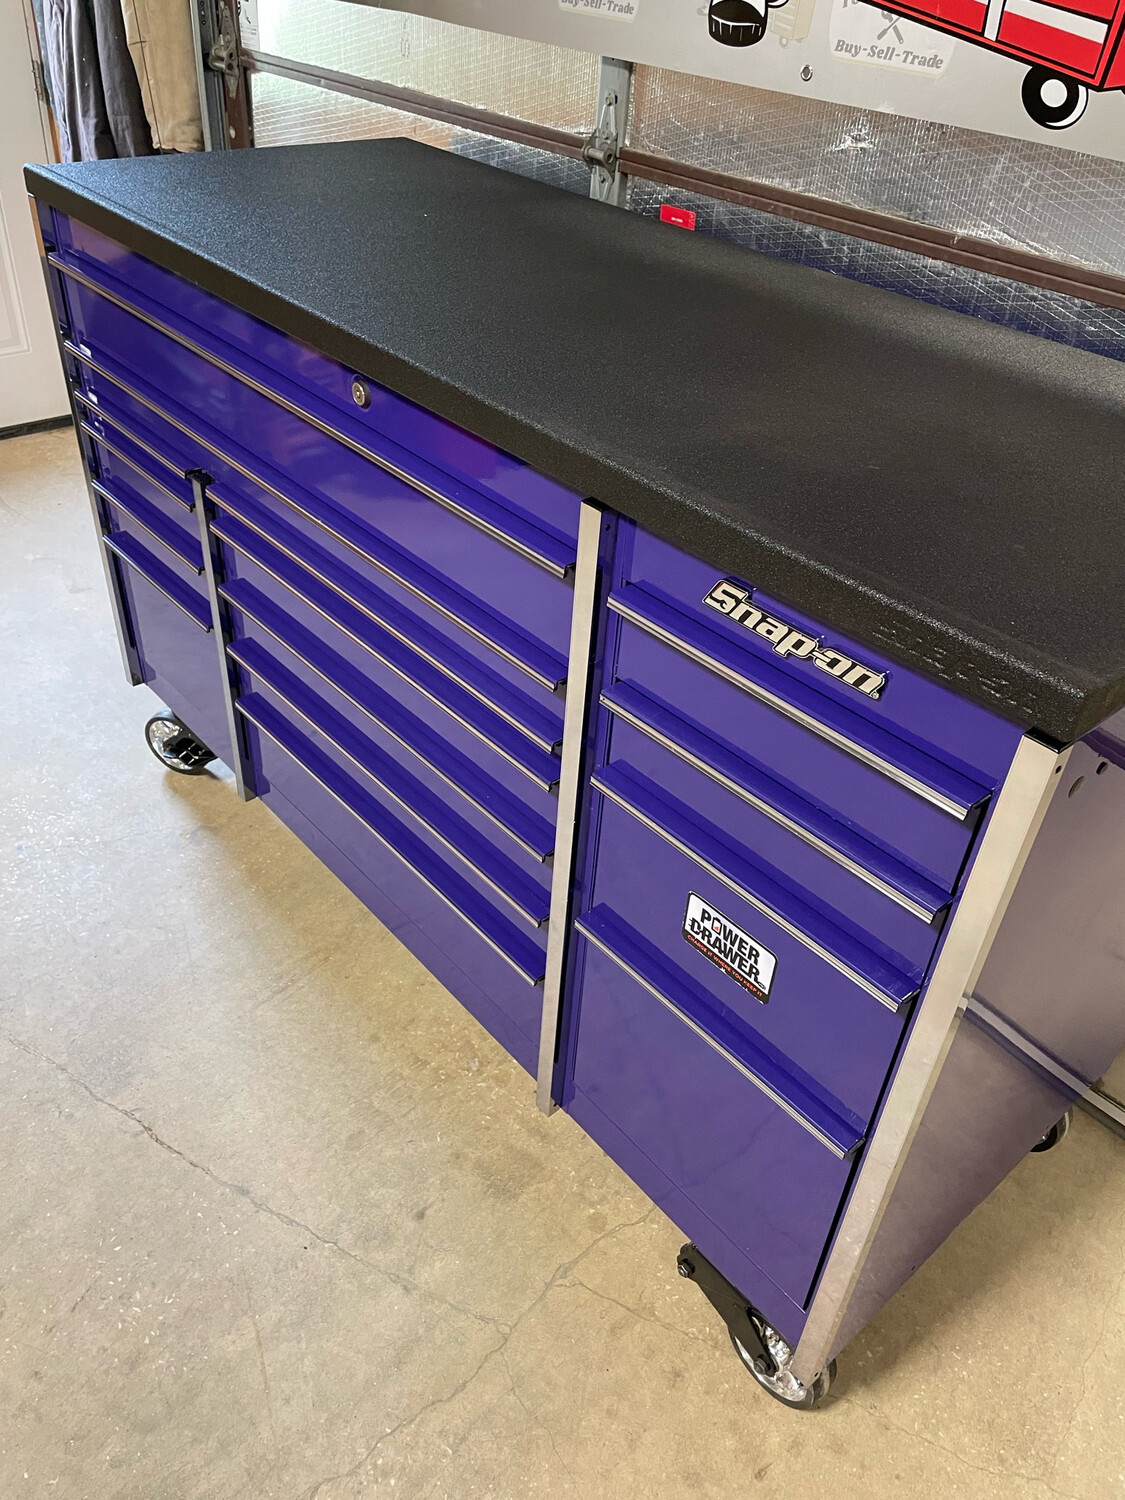 Snap on KRL1023 in Black with purple trim with rhino edge worktop. Box is  in amazing condition at about a year old and priced at $5500, check out  the